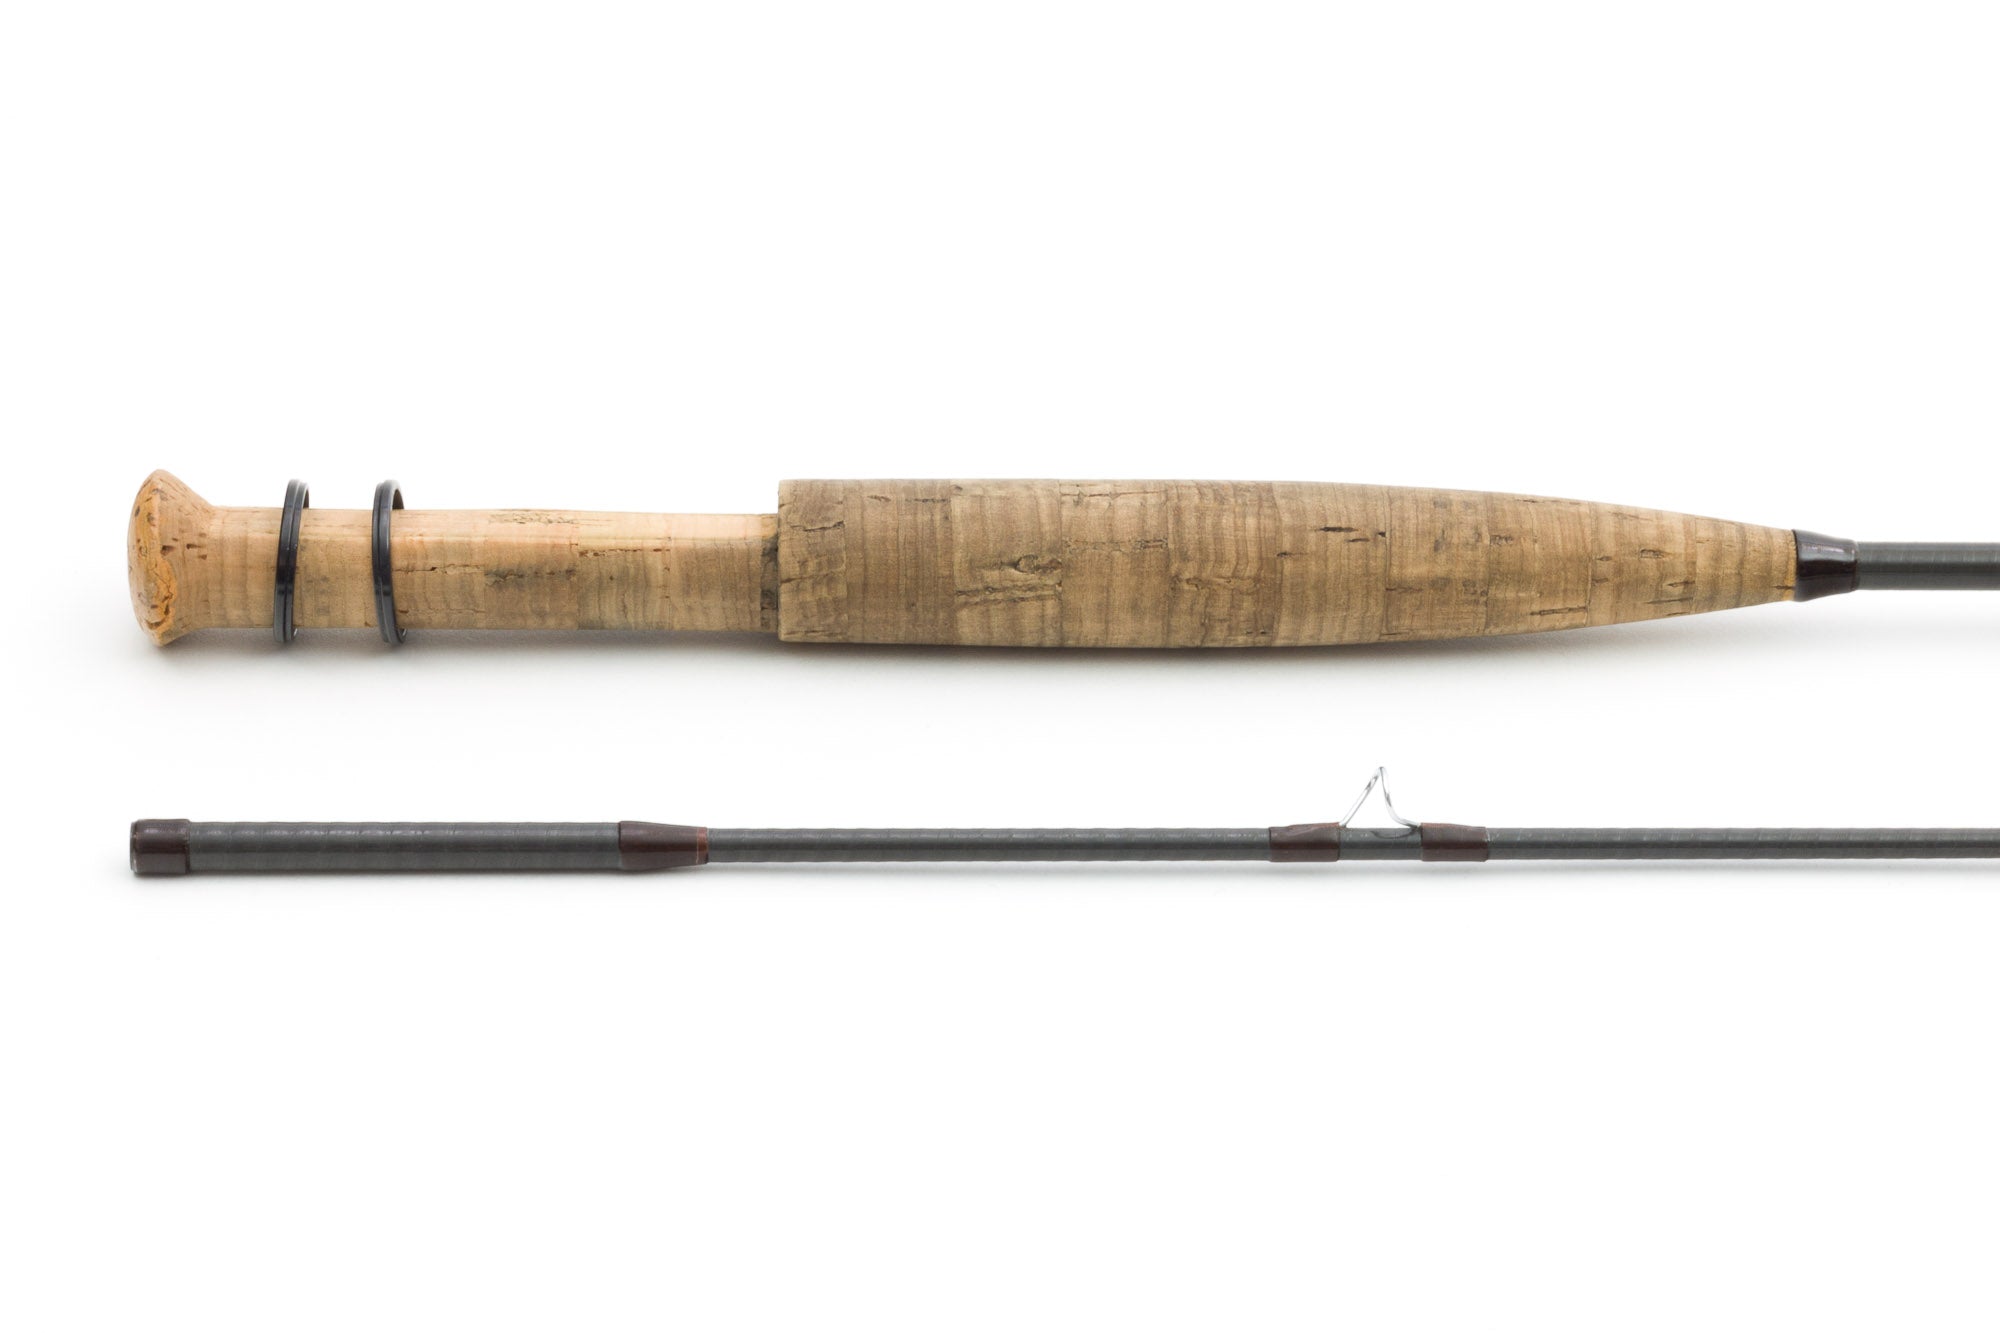 Orvis - Superfine One Ounce 6'6 2-piece 2wt Graphite Fly Rod